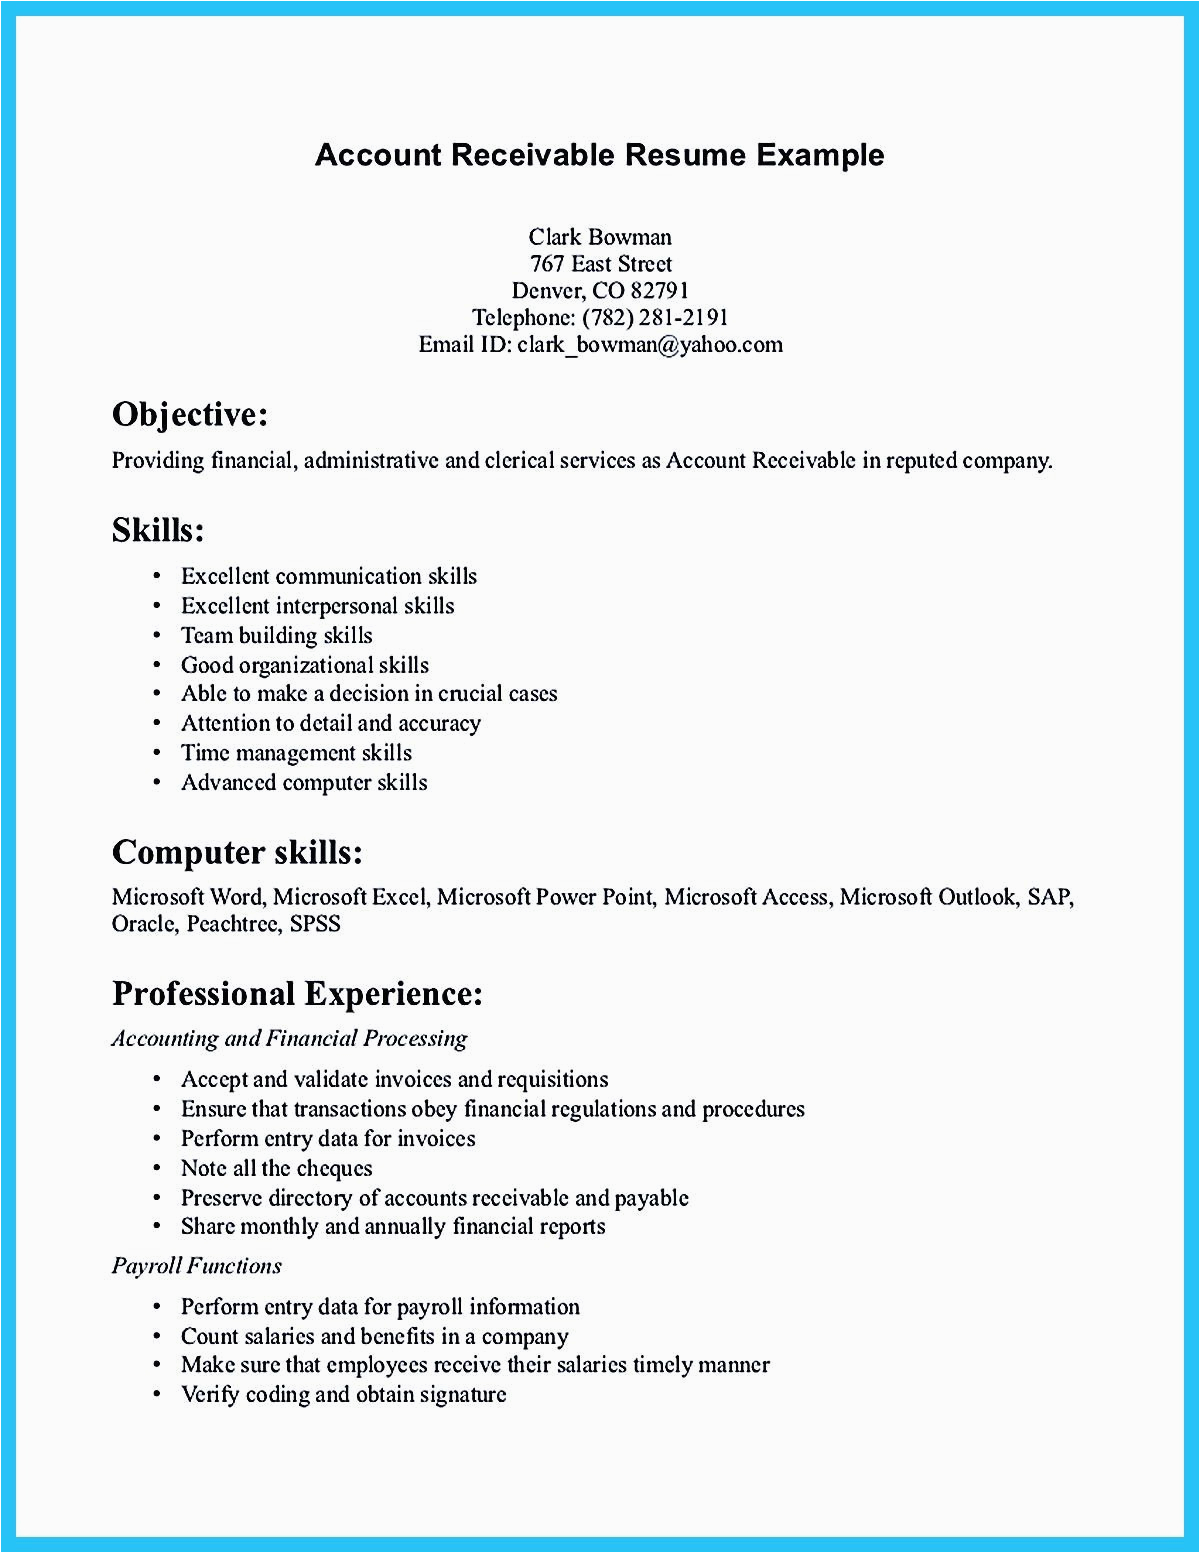 Sample Of Skills and Strengths In Resume Perfect Accounts Receivable Resume to Get Hired